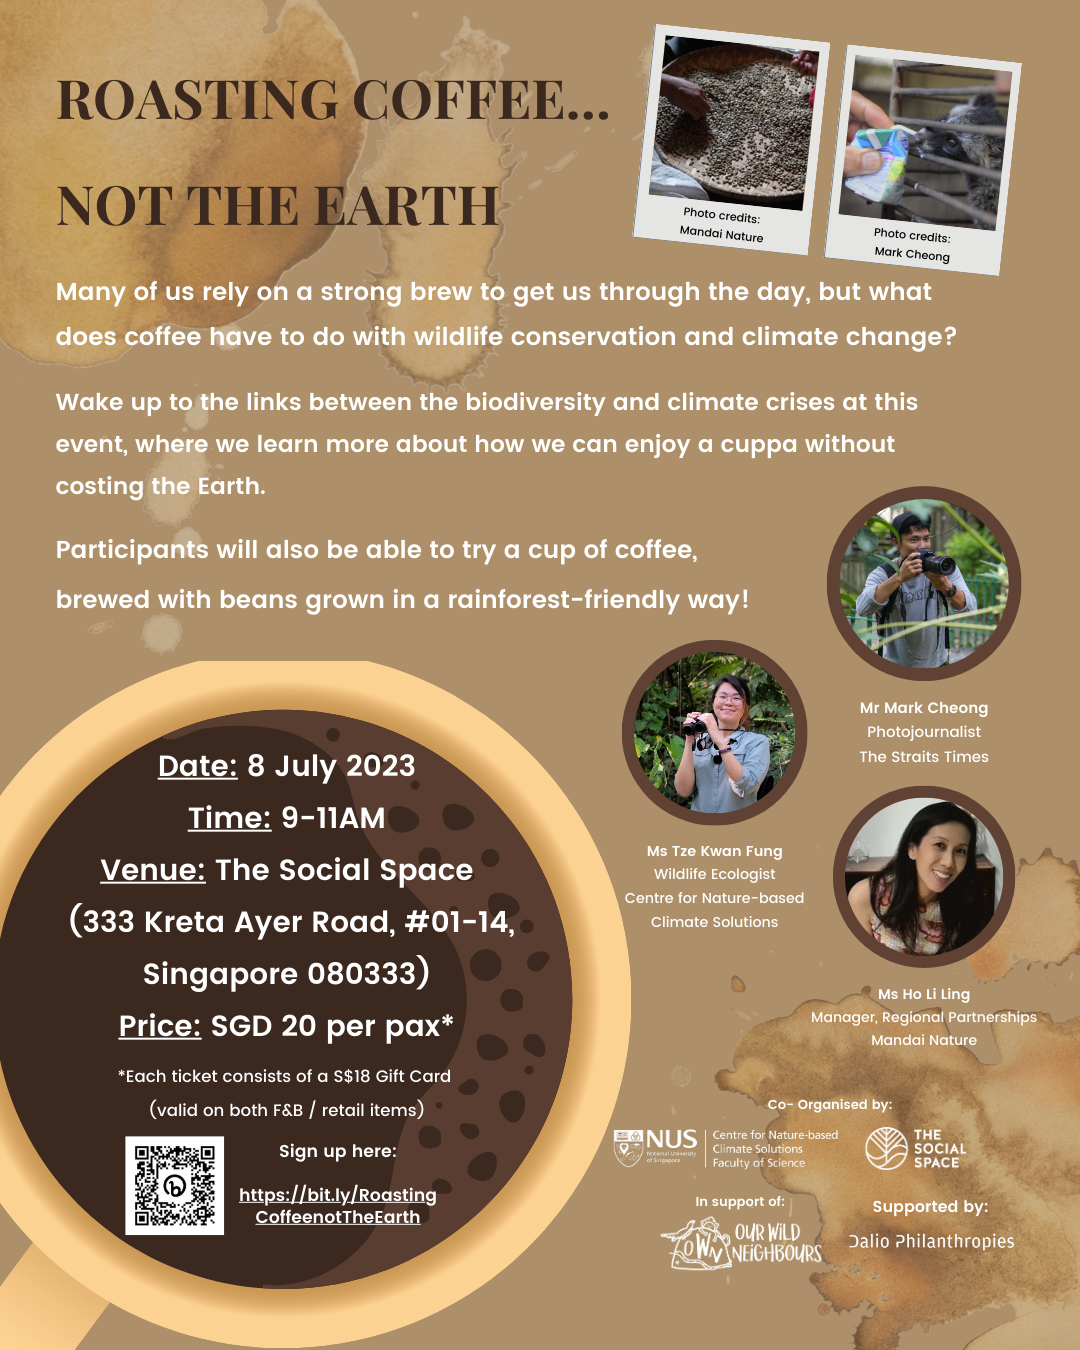 Roasting Coffee, not the Earth: Event by NUS Centre for Nature-based Climate Solutions